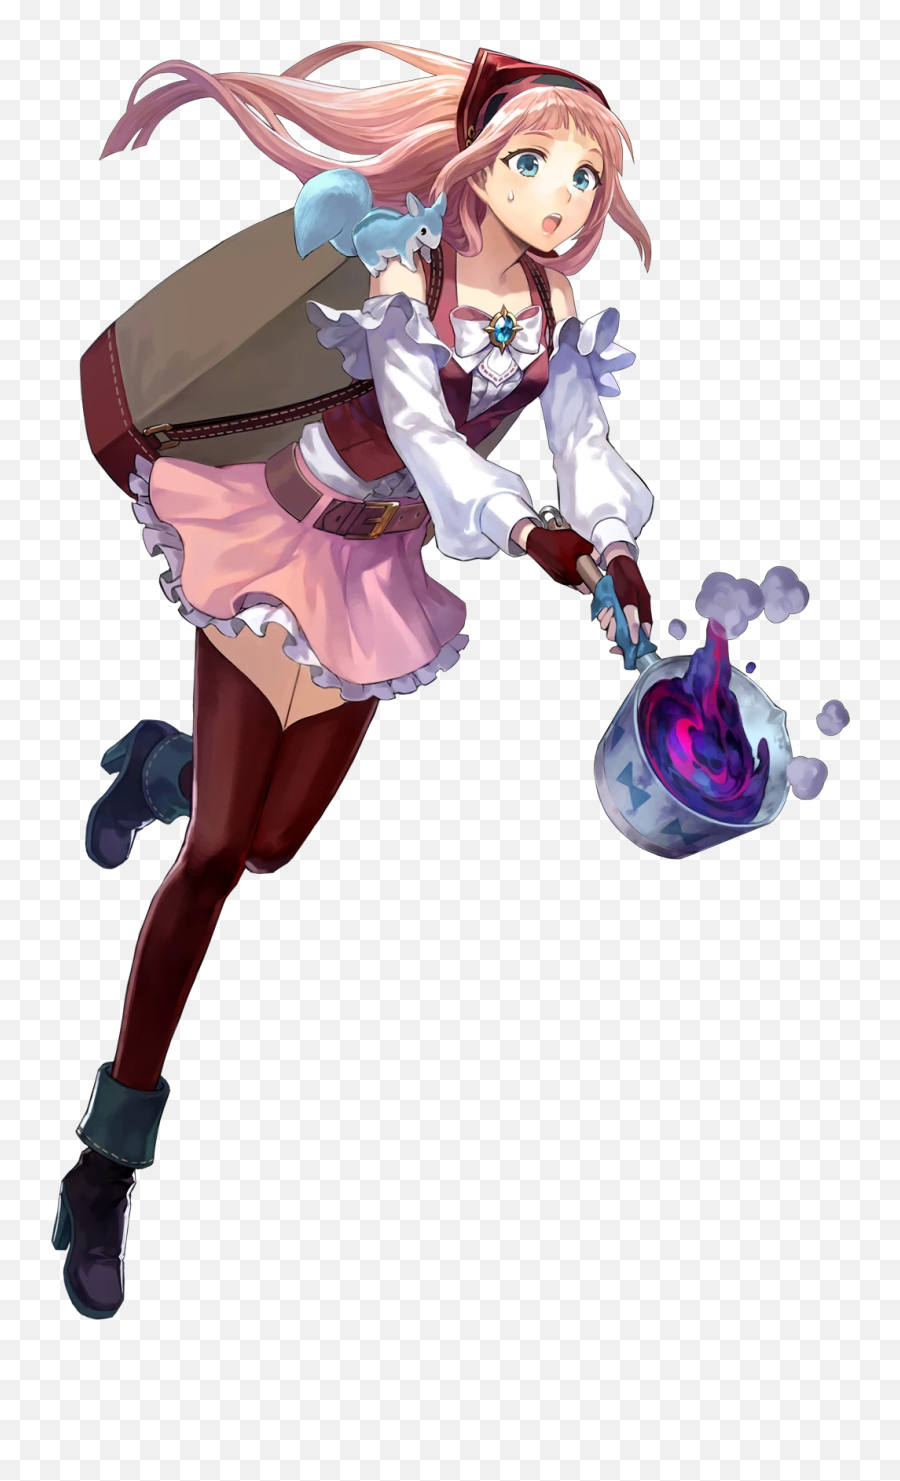 Anime Fire Png - Fire Emblem Heroes Felicia,Anime Fire Png